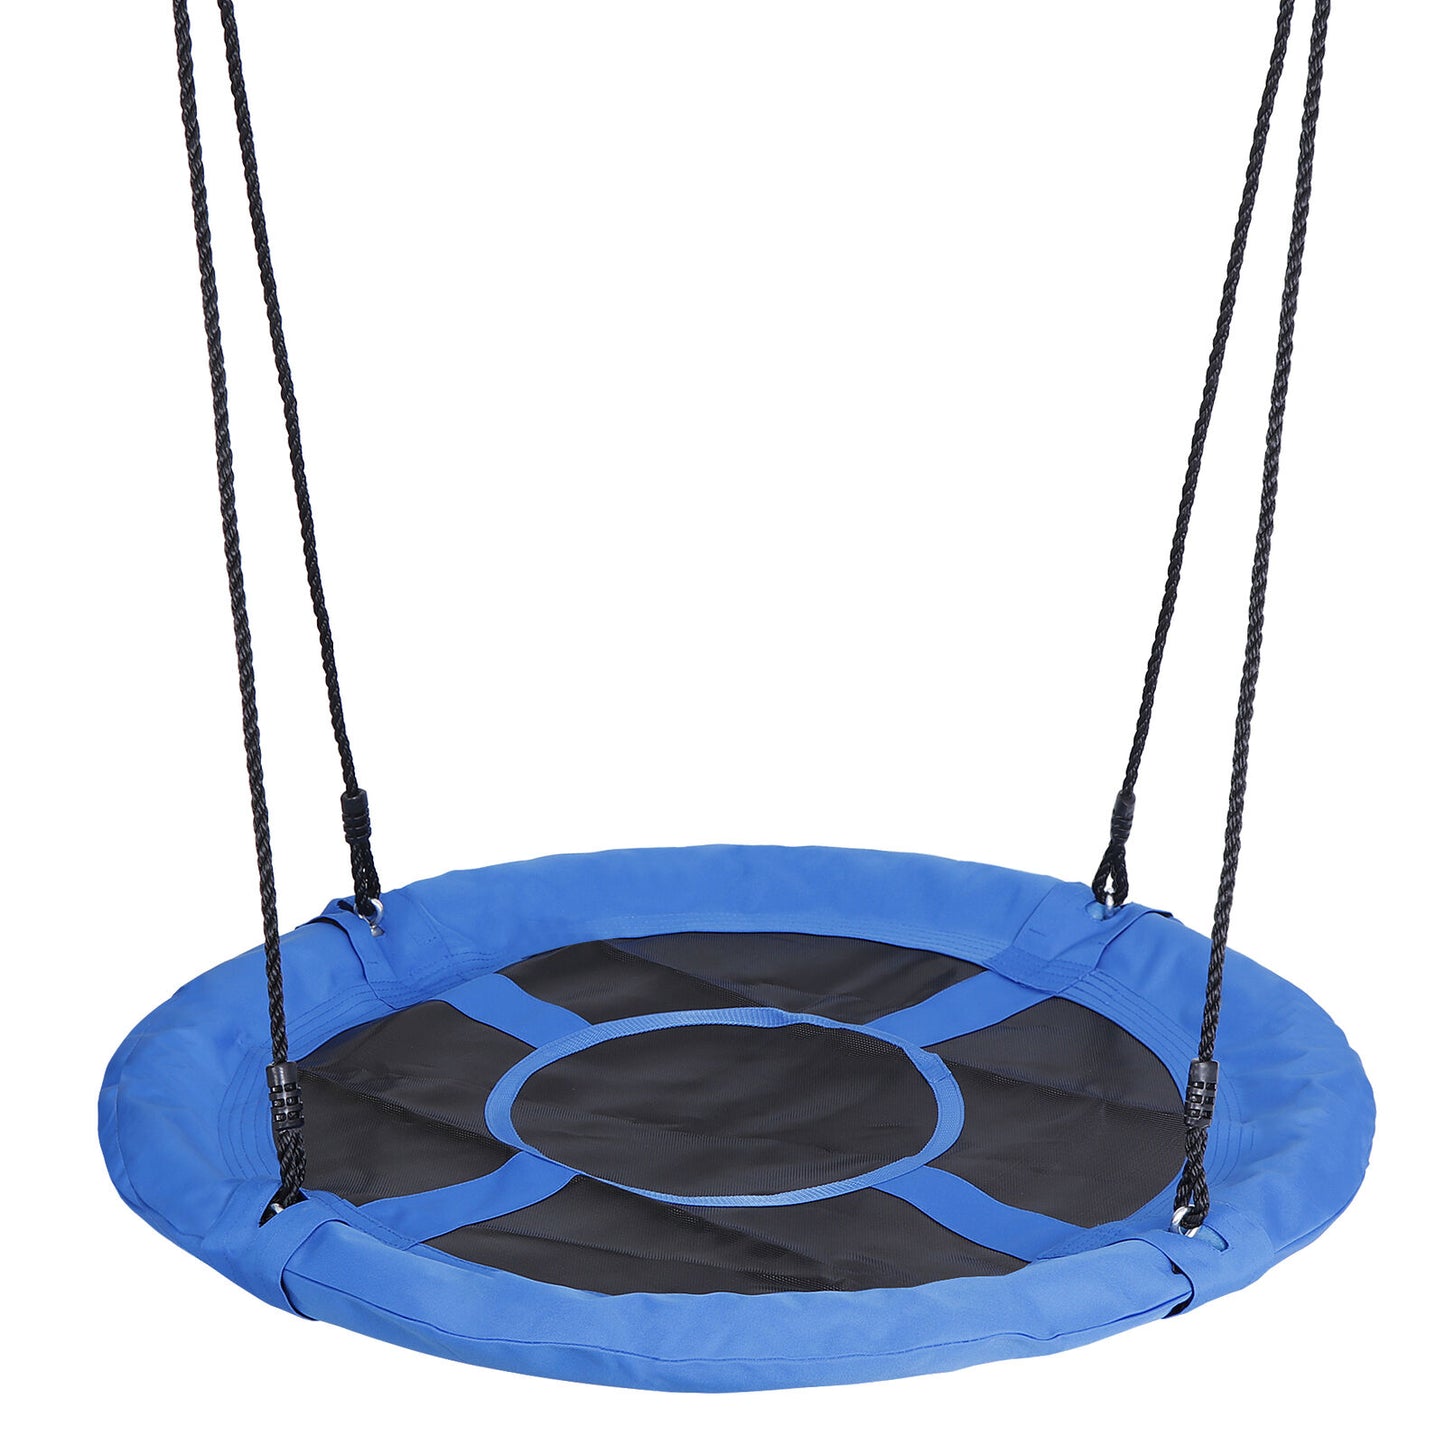 40"Round Blue Saucer Tree Swing 900D Oxford Waterproof Max 800Lbs W/Hanging Rope